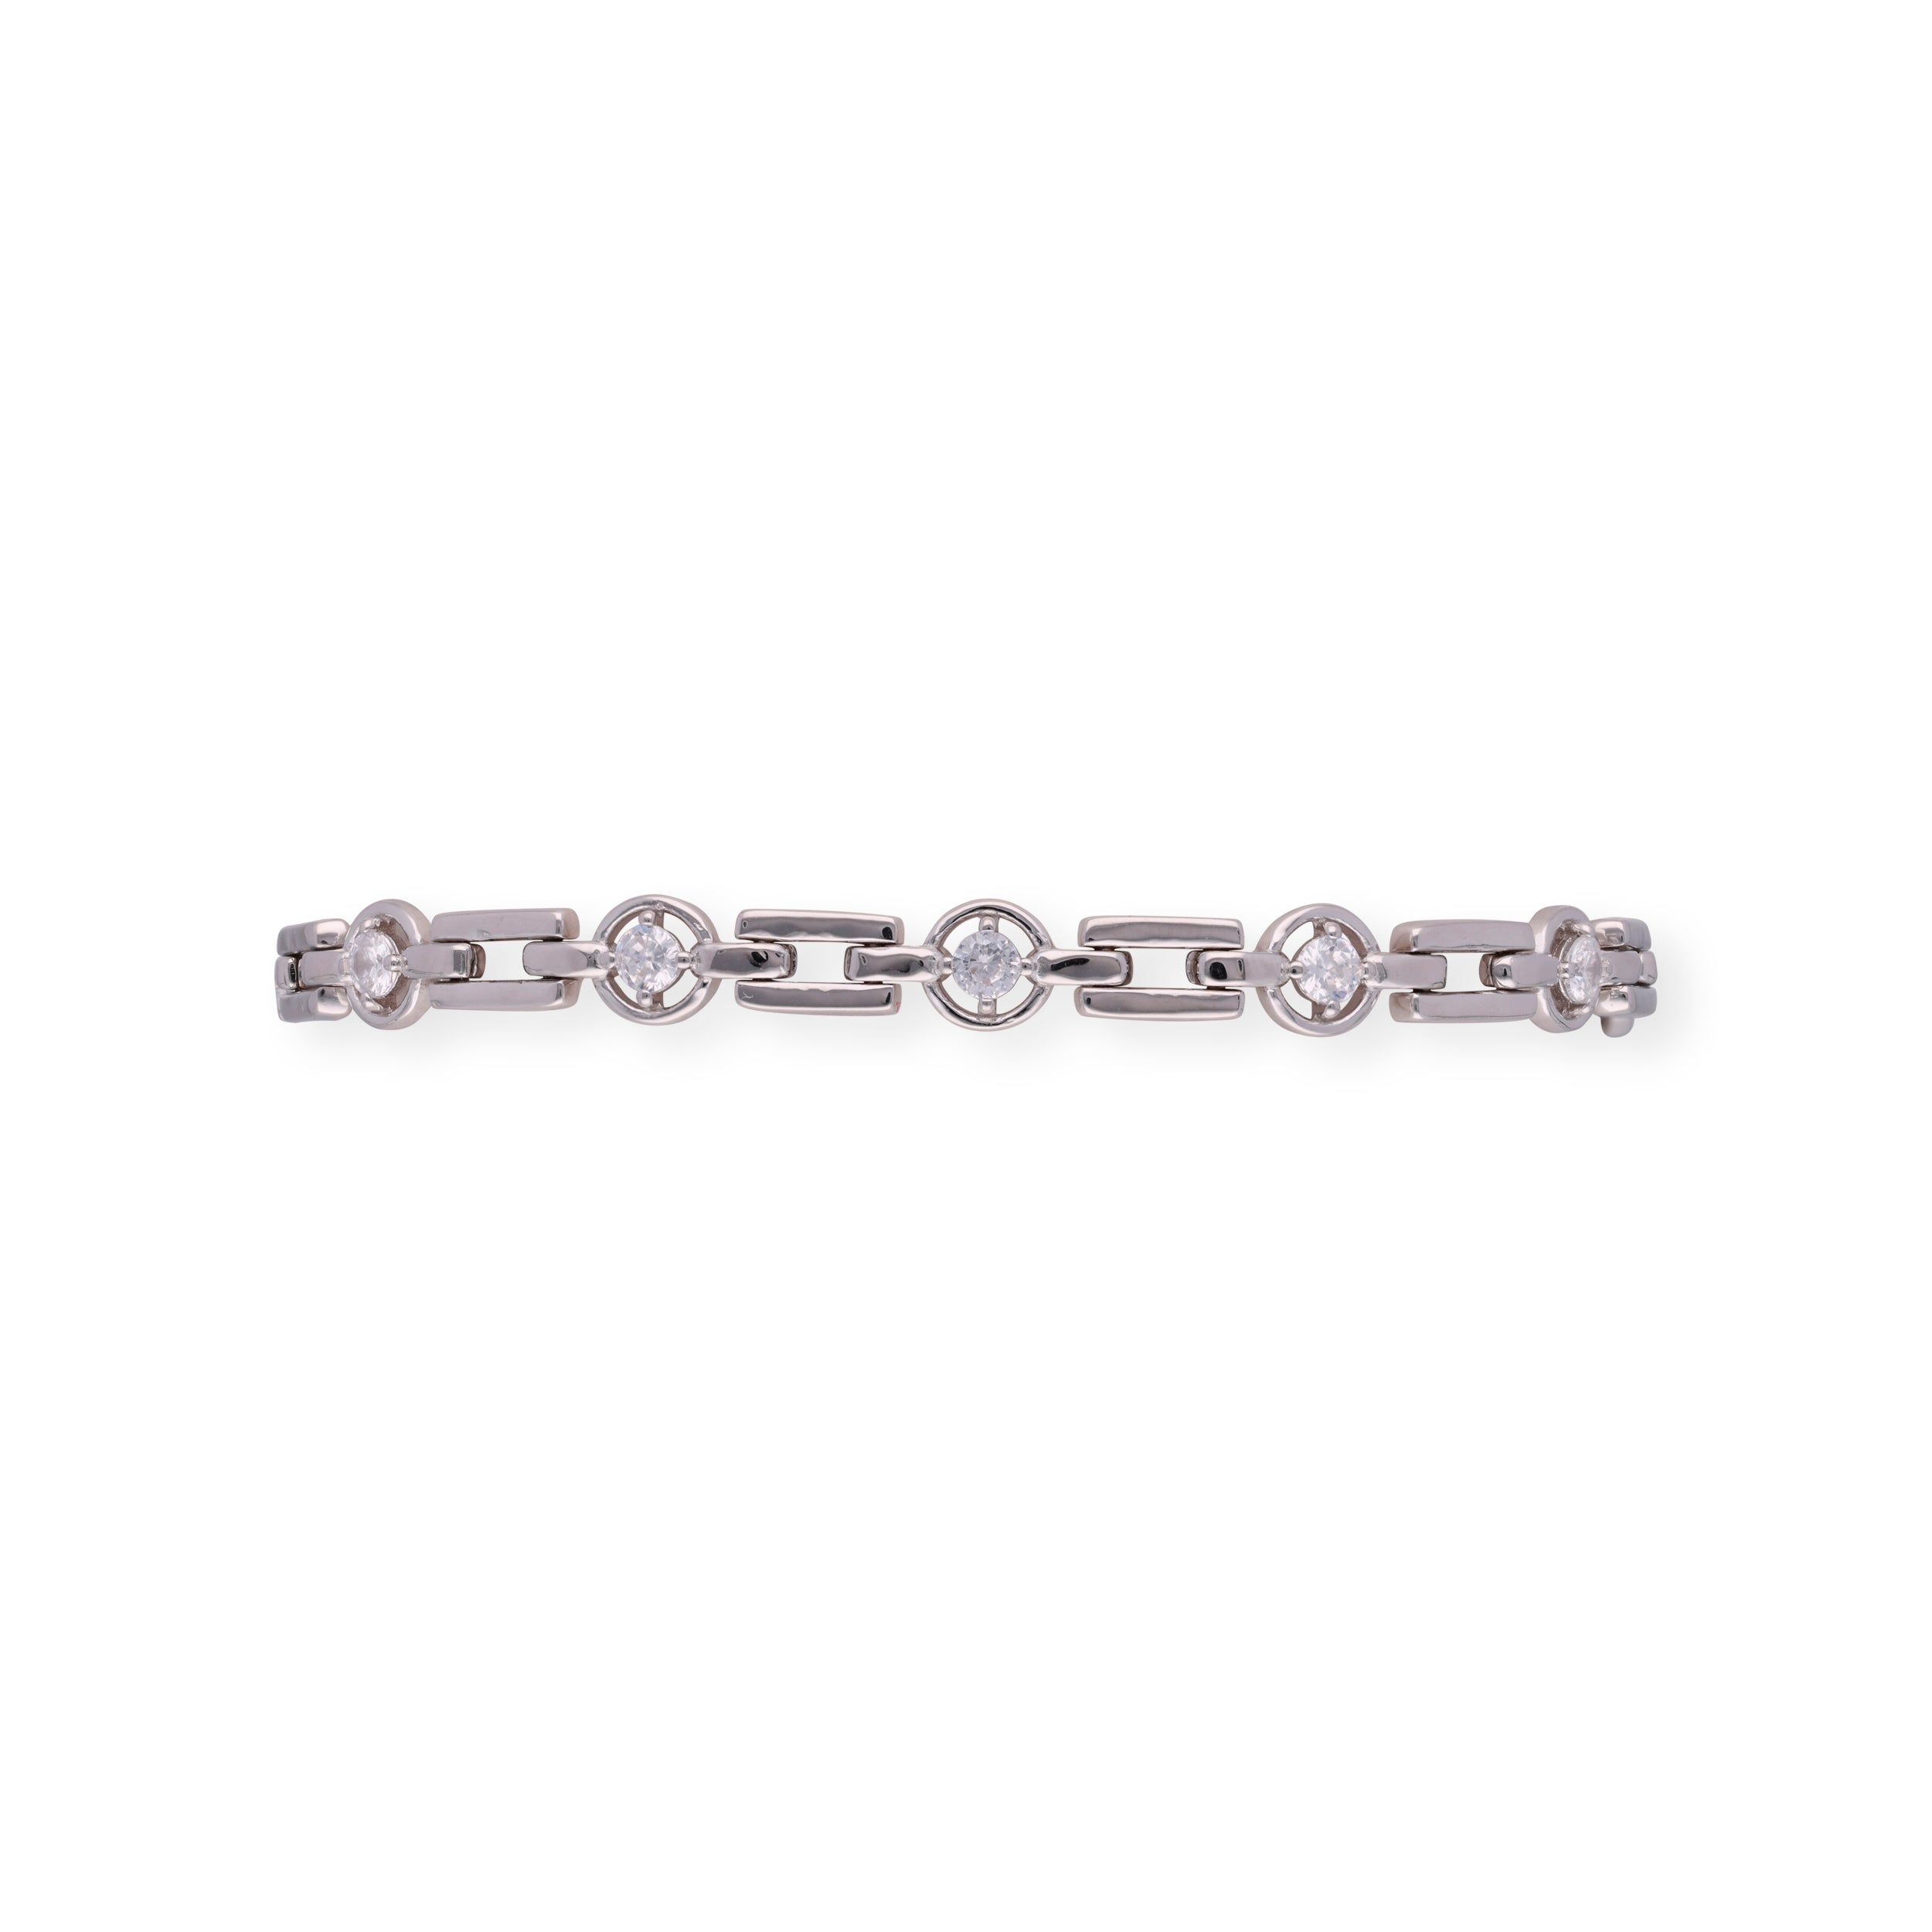 Sterling Silver Single Line Bracelet with Cubic Zirconia and Glossy Finish | SKU : 0003114087, 0003114094